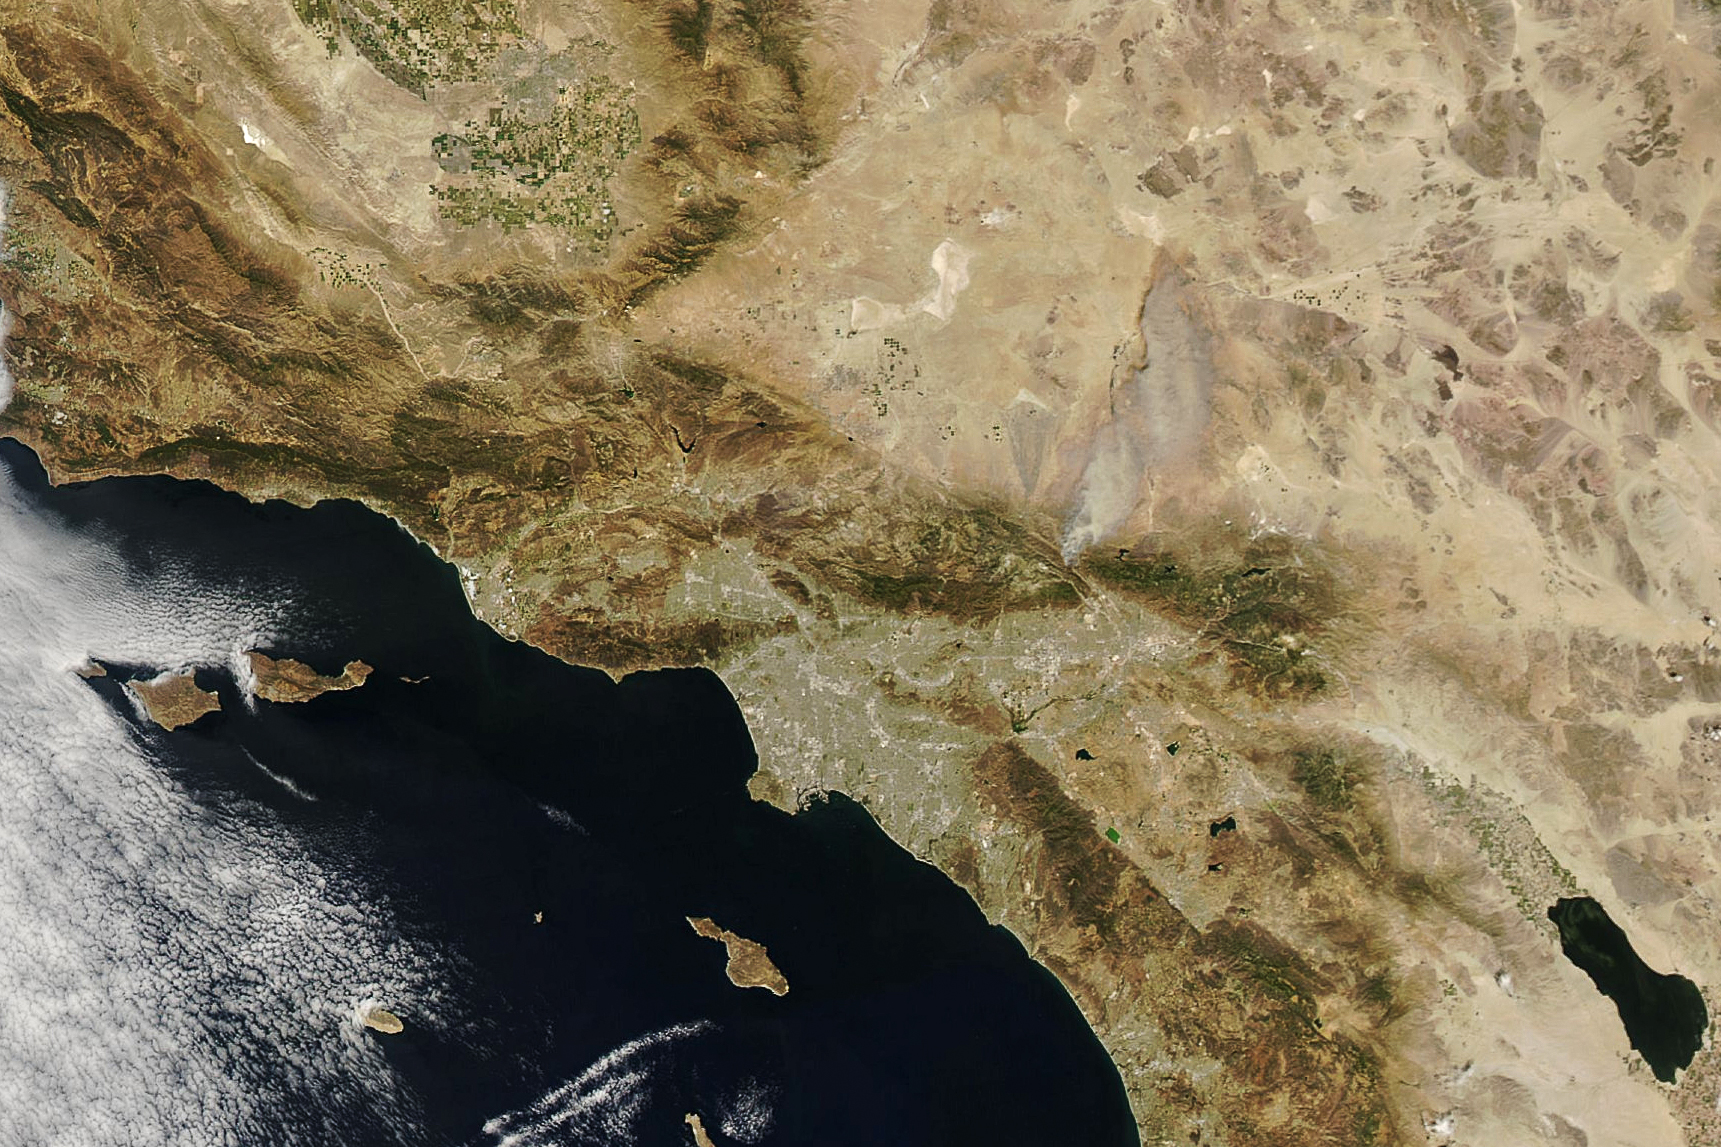 Blue Cut Fire Scorches Southern California - related image preview